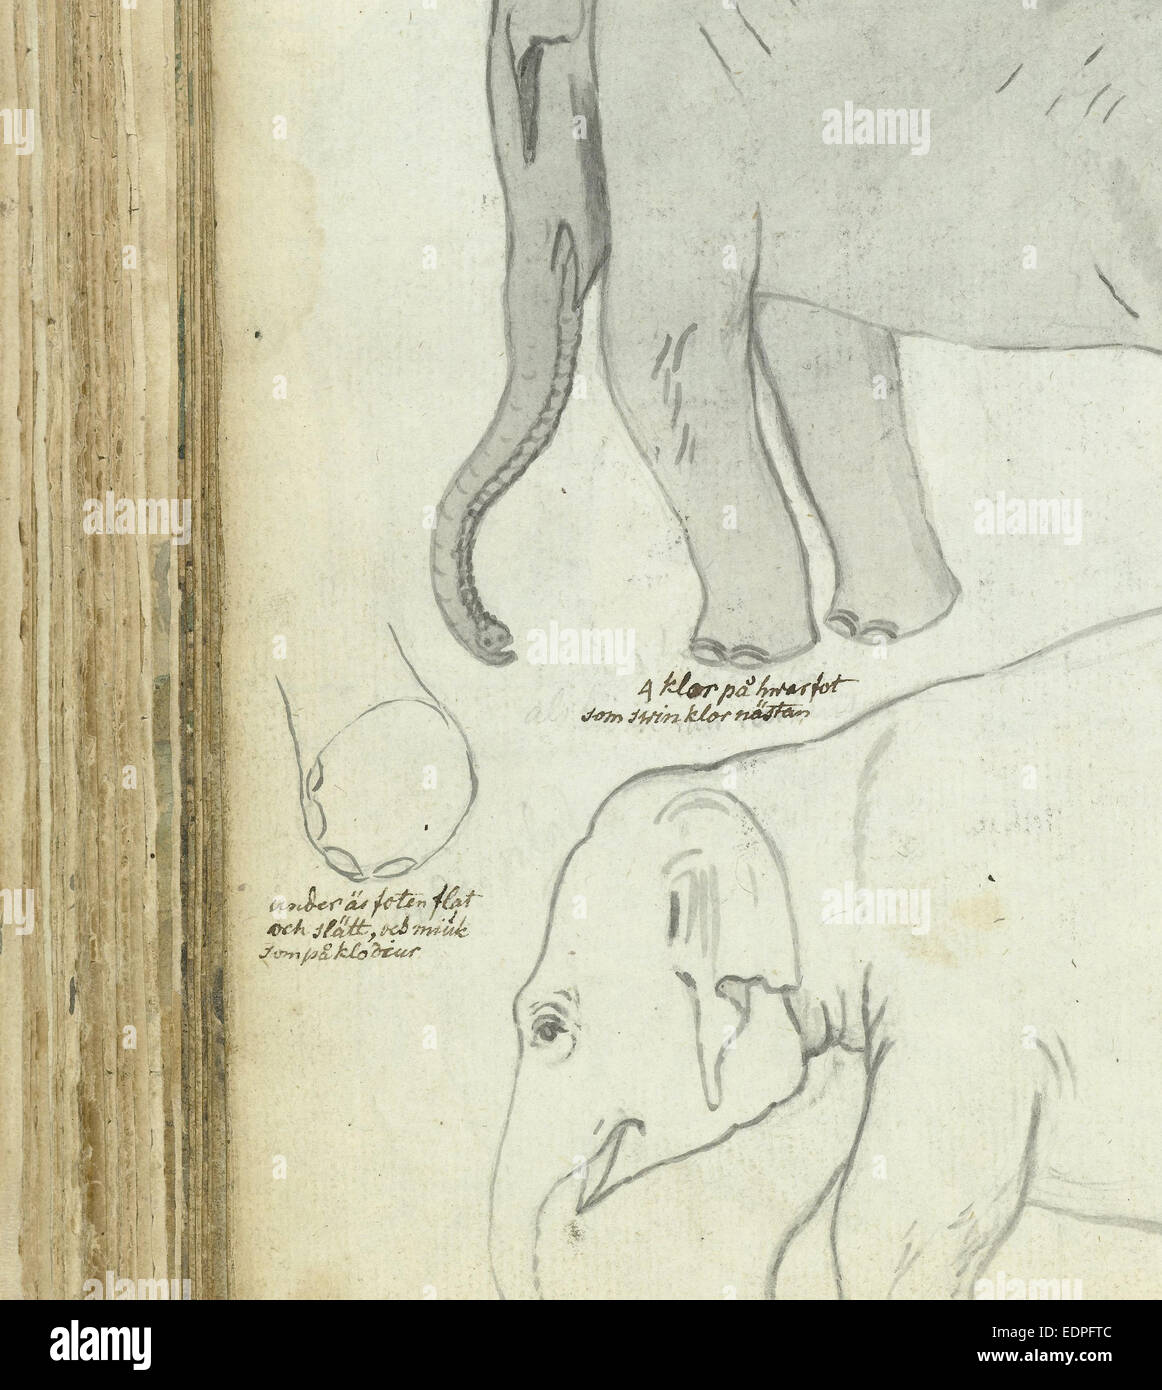 Young elephant, Jan Brandes, 1785 Stock Photo